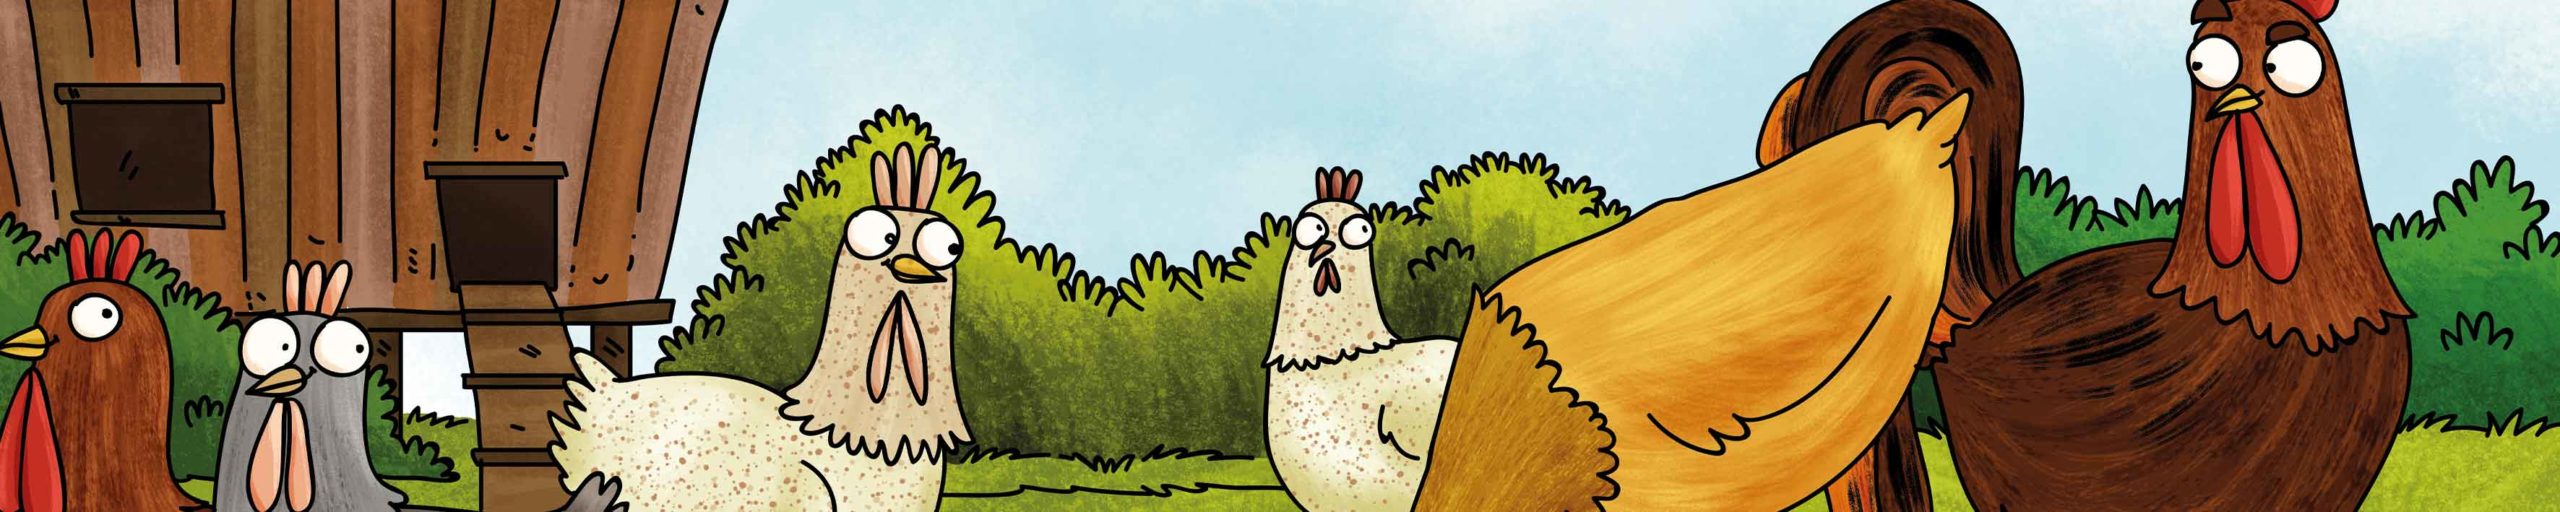 chickens in childrens books